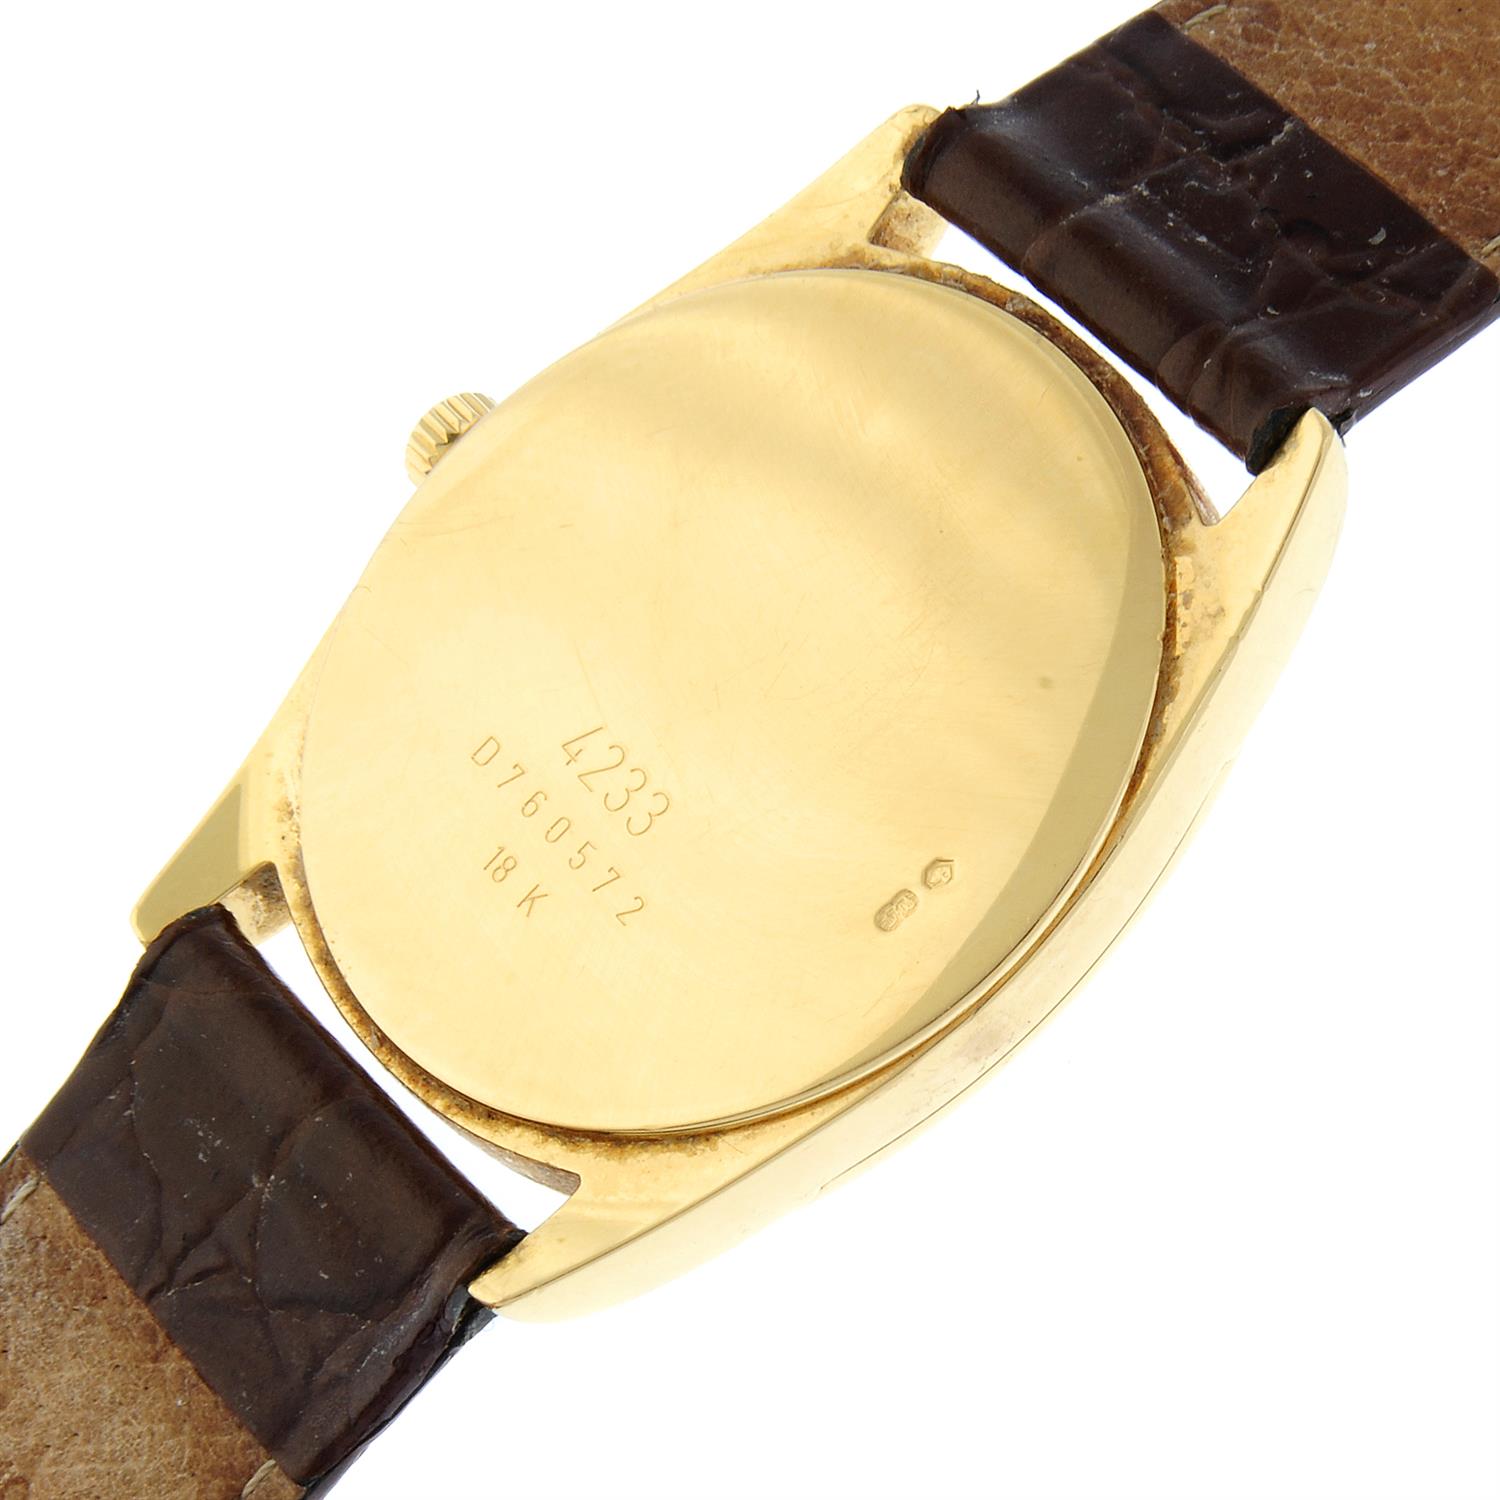 Rolex - a Cellini watch, 33mm. - Image 4 of 4